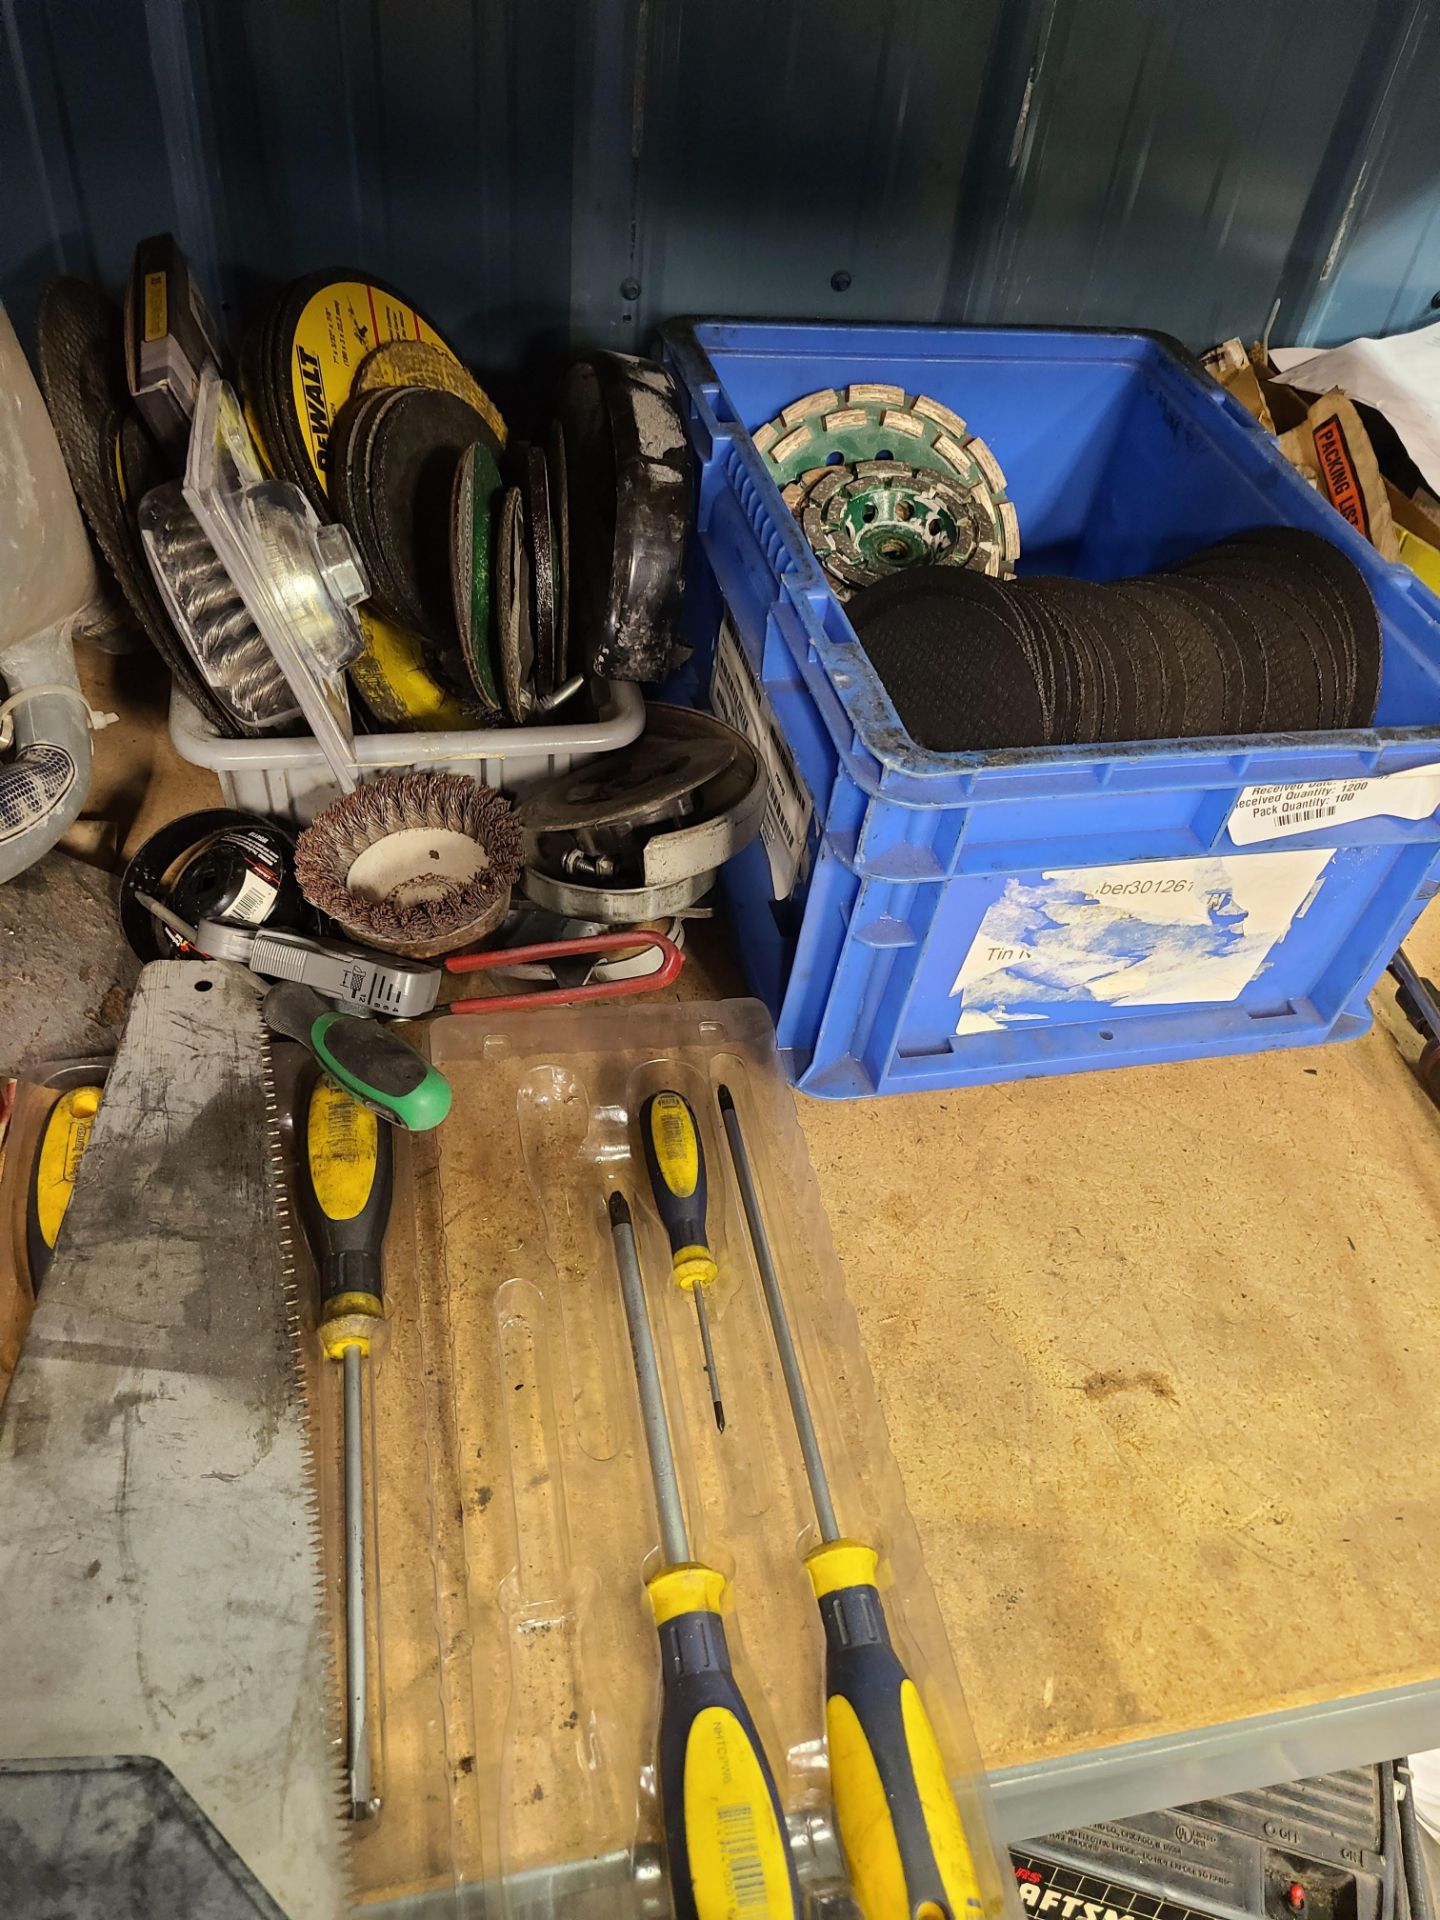 LOT OF MISC TOOLS (SCREWDRIVERS; GRINDER; GRINDING WHEELS; PNEUMATIC TOOLS; SAW) - Image 3 of 4